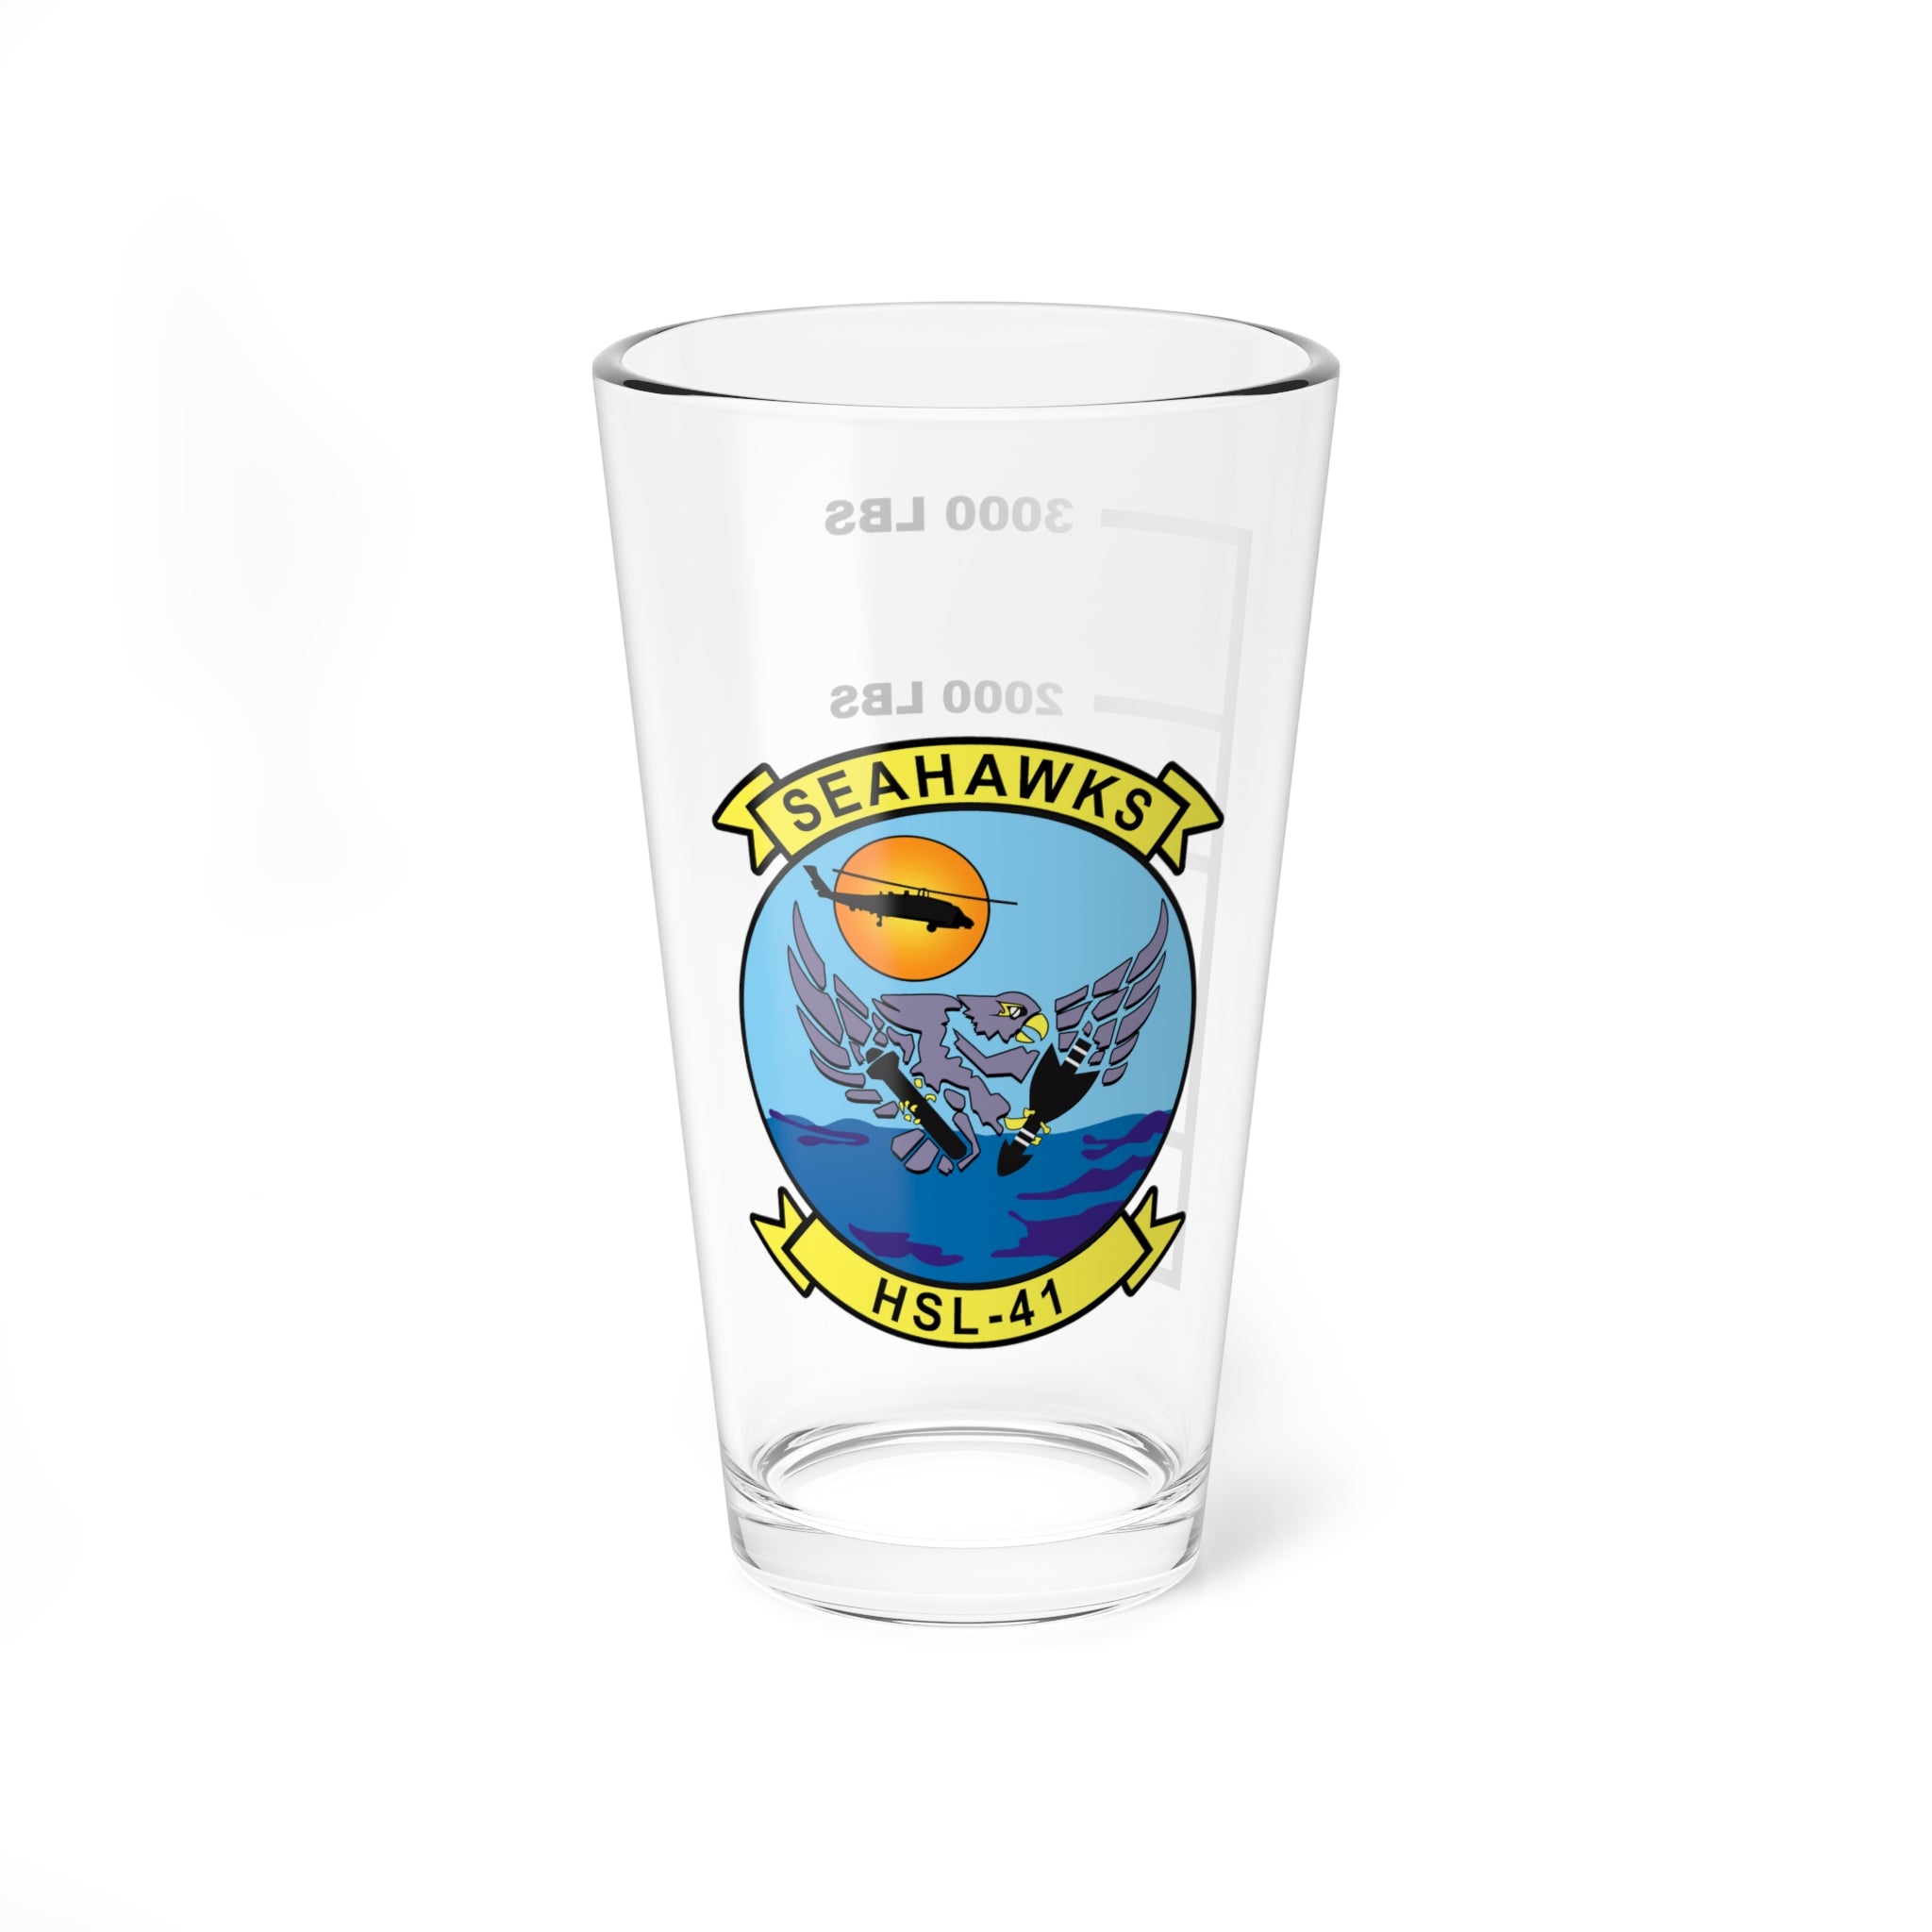 HSL-41 "Seahawks" Fuel Low Pint Glass, Navy Maritime Strike and ASW Helicopter Squadron flying the SH-60B Seahawk